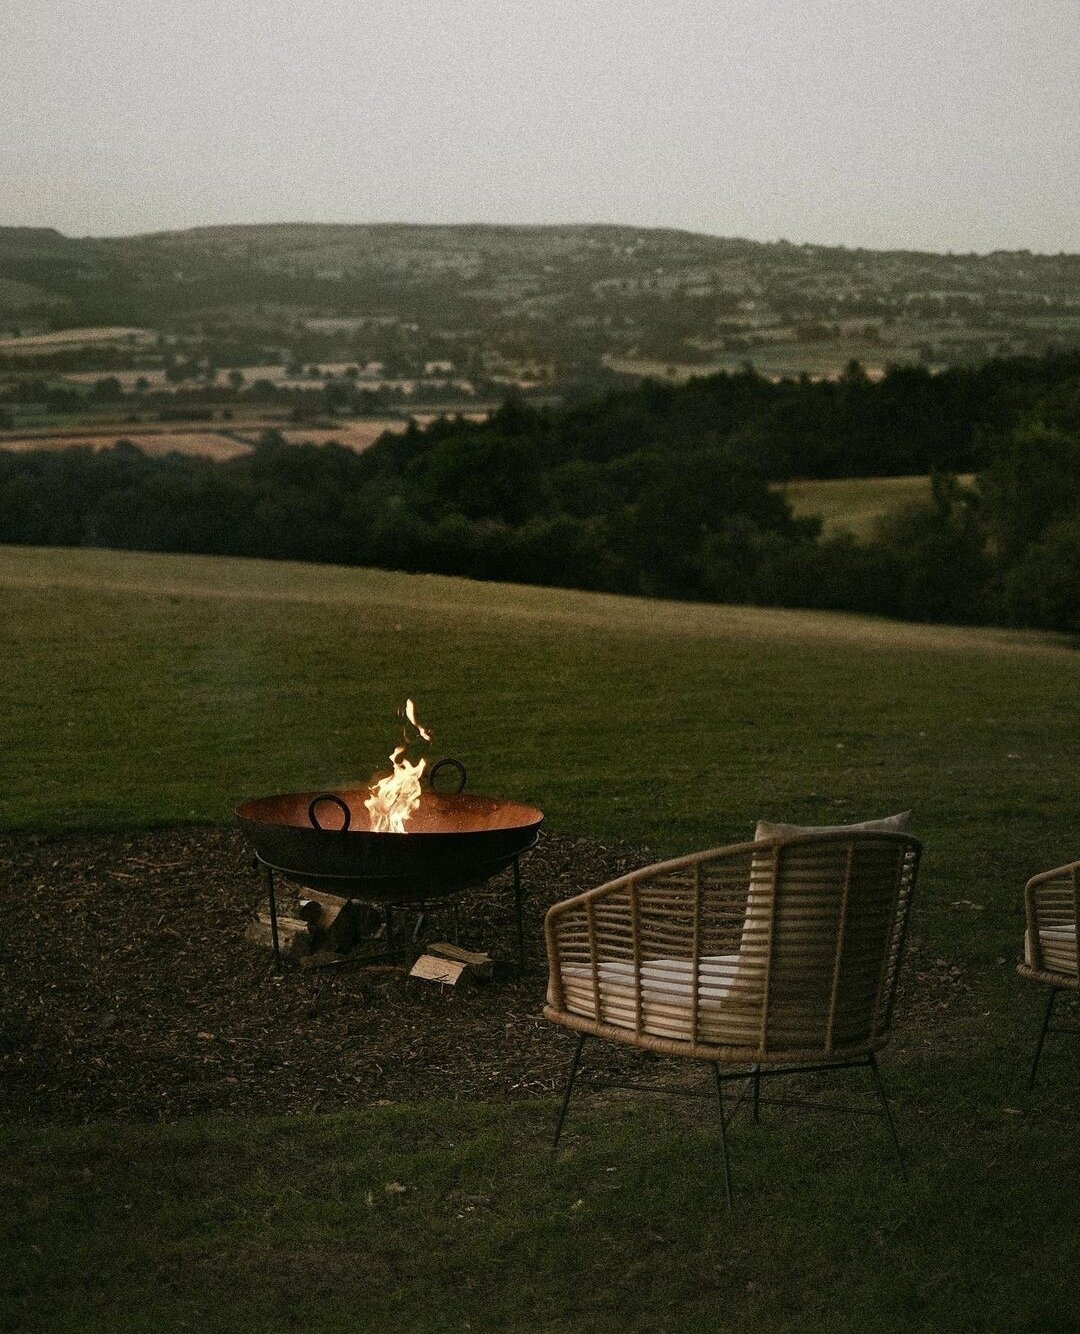 Cosy evenings on the estate captured by @polly.florence⁠
Planning an Autumn escape? From rustic cabins to charming cottages we have a selection of places for you to stay. Check out the link in our bio to to discover our exclusive offerings at Downton